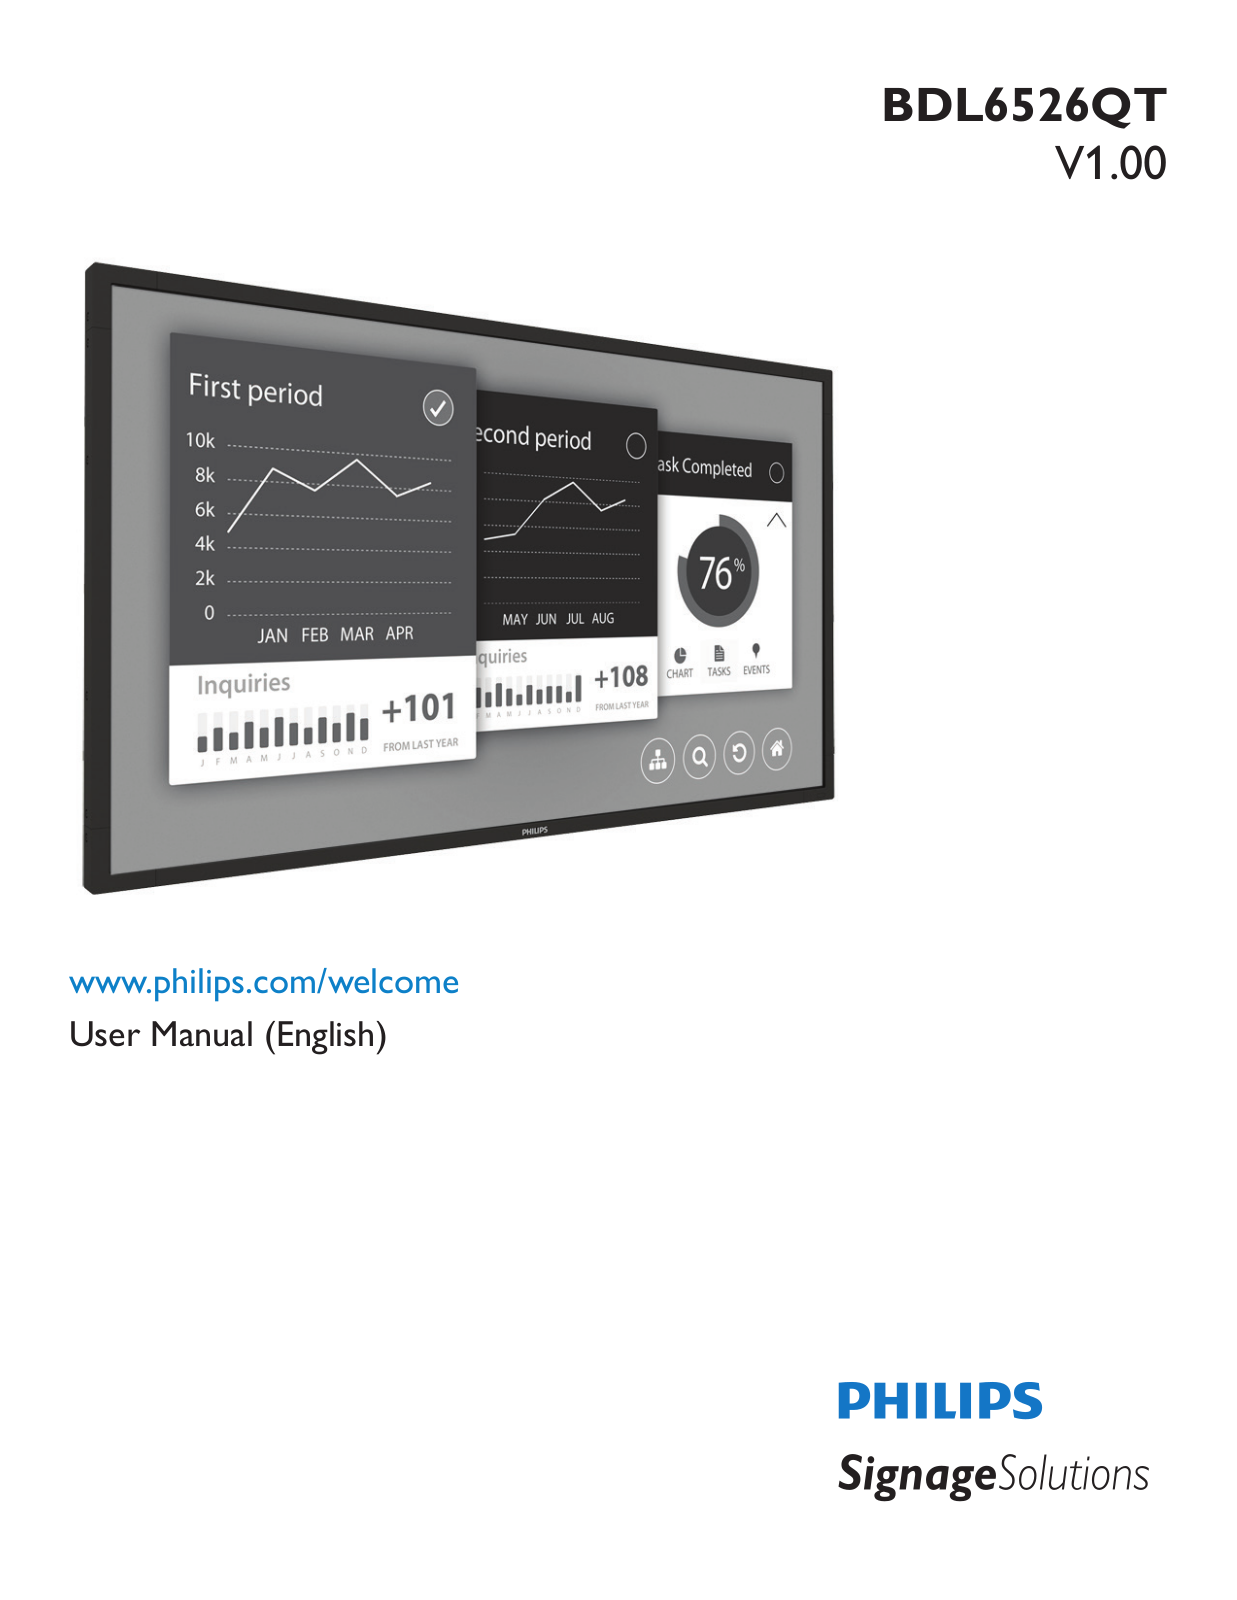 Philips BDL6526QT User Guide